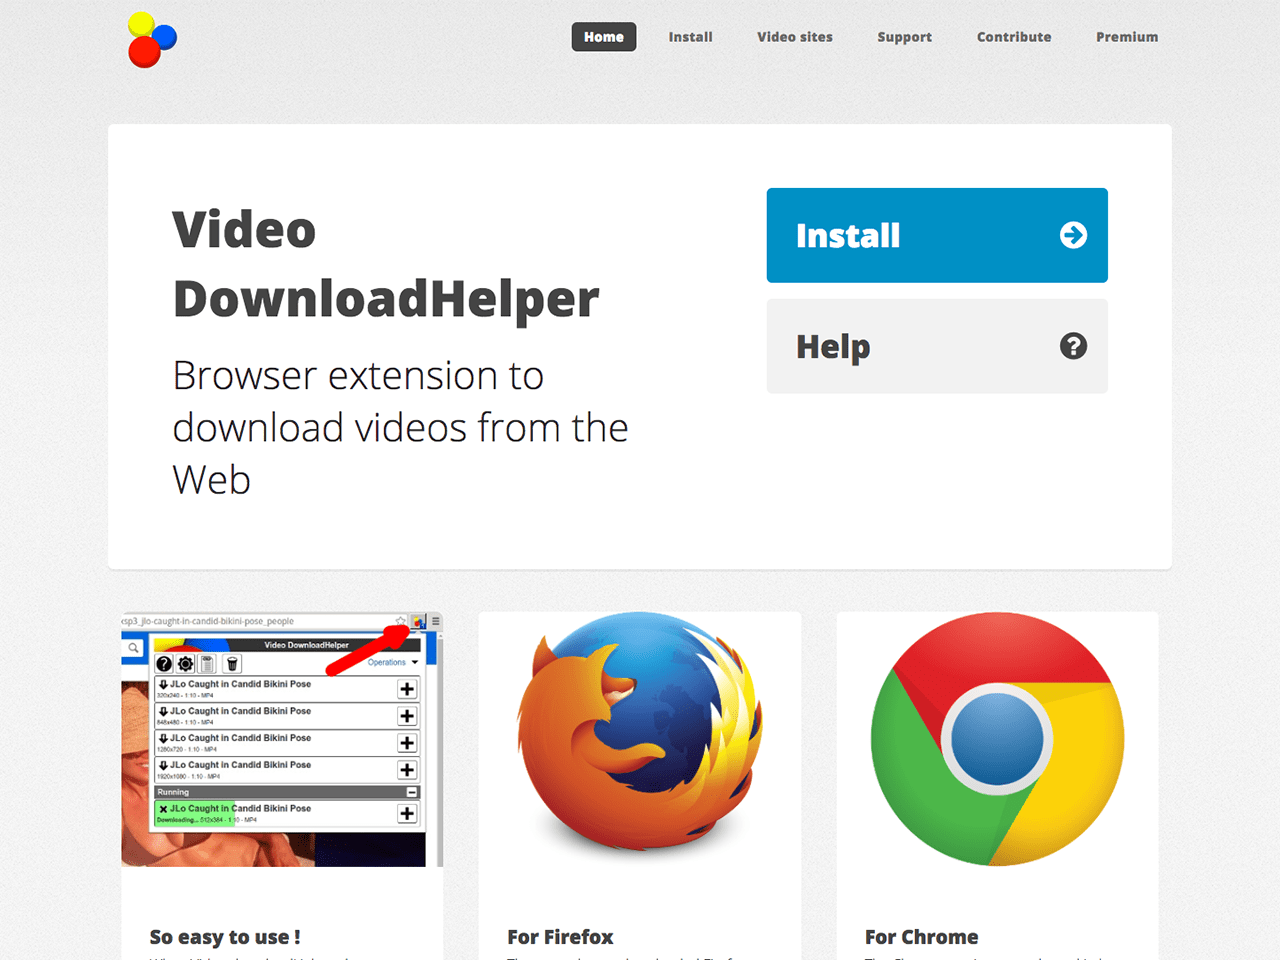 how to use video downloadhelper